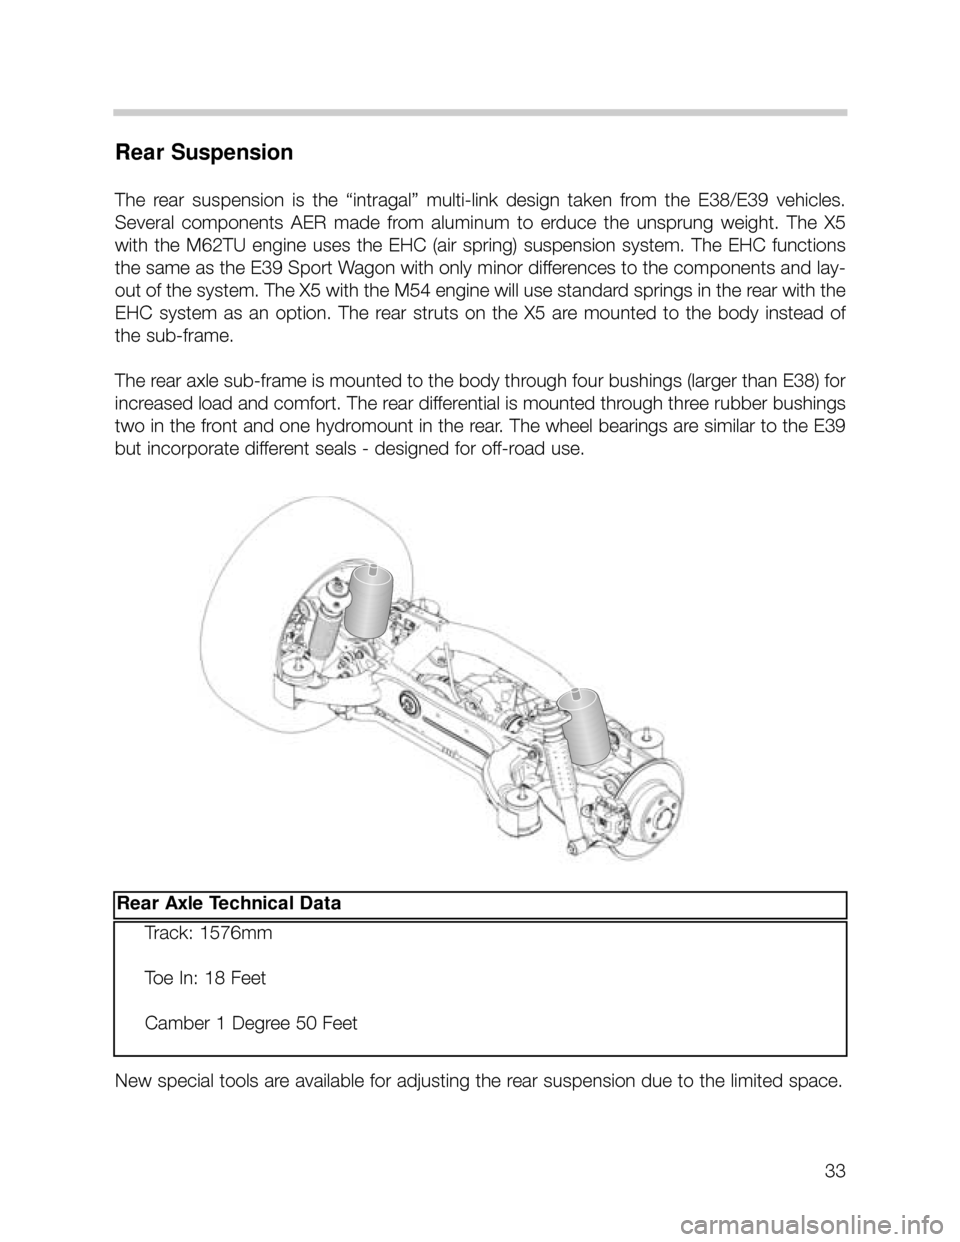 BMW X5 2001 E53 Workshop Manual 33
Rear Suspension
The  rear  suspension  is  the  “intragal”  multi-link  design  taken  from  the  E38/E39  vehicles.
Several  components  AER  made  from  aluminum  to  erduce  the  unsprung  w